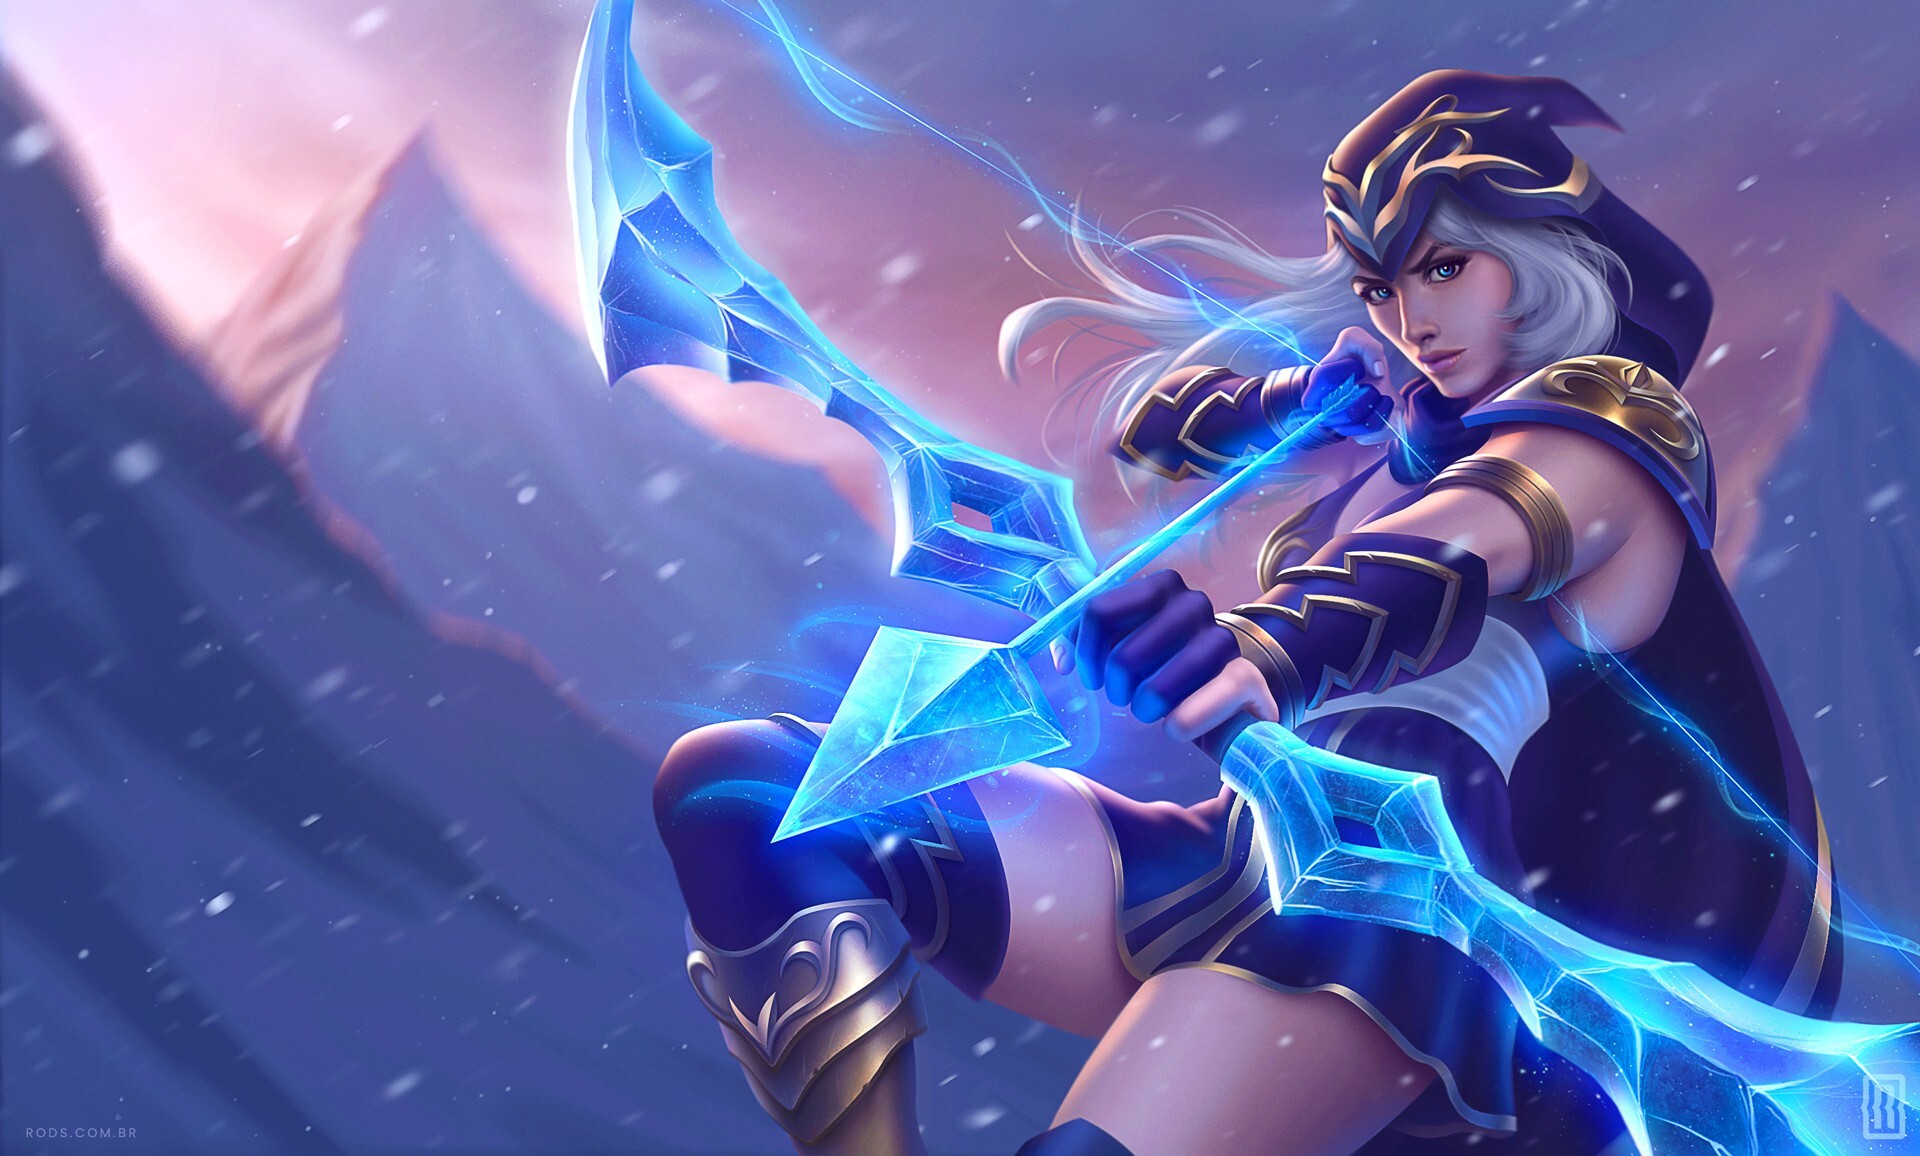 Ashe - The Frost Archer.